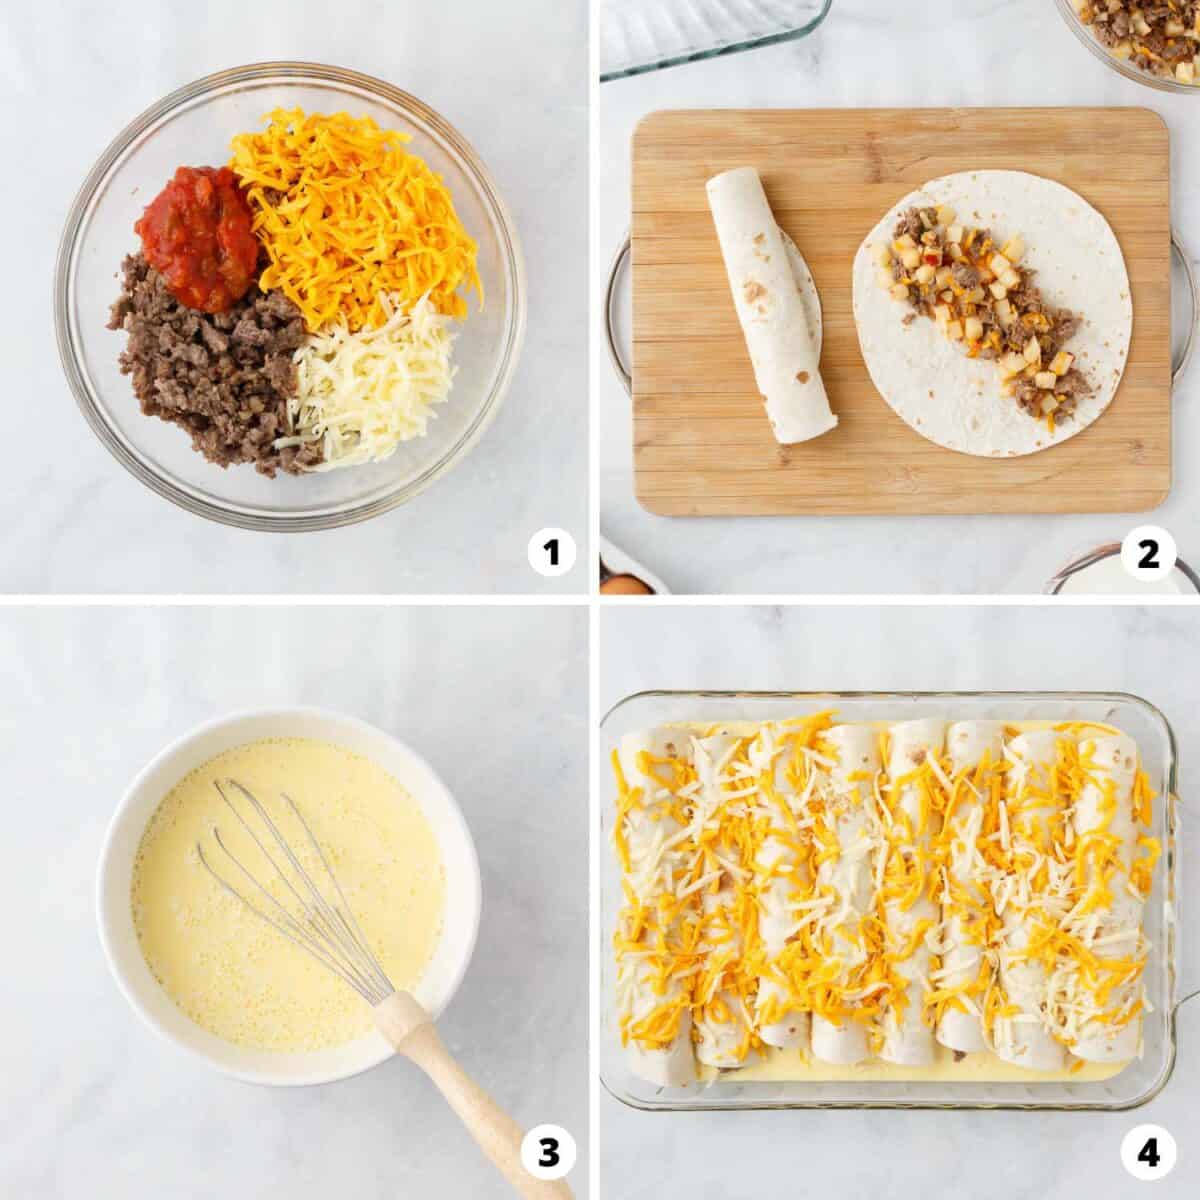 Showing how to make breakfast enchiladas in a 4 step collage. 